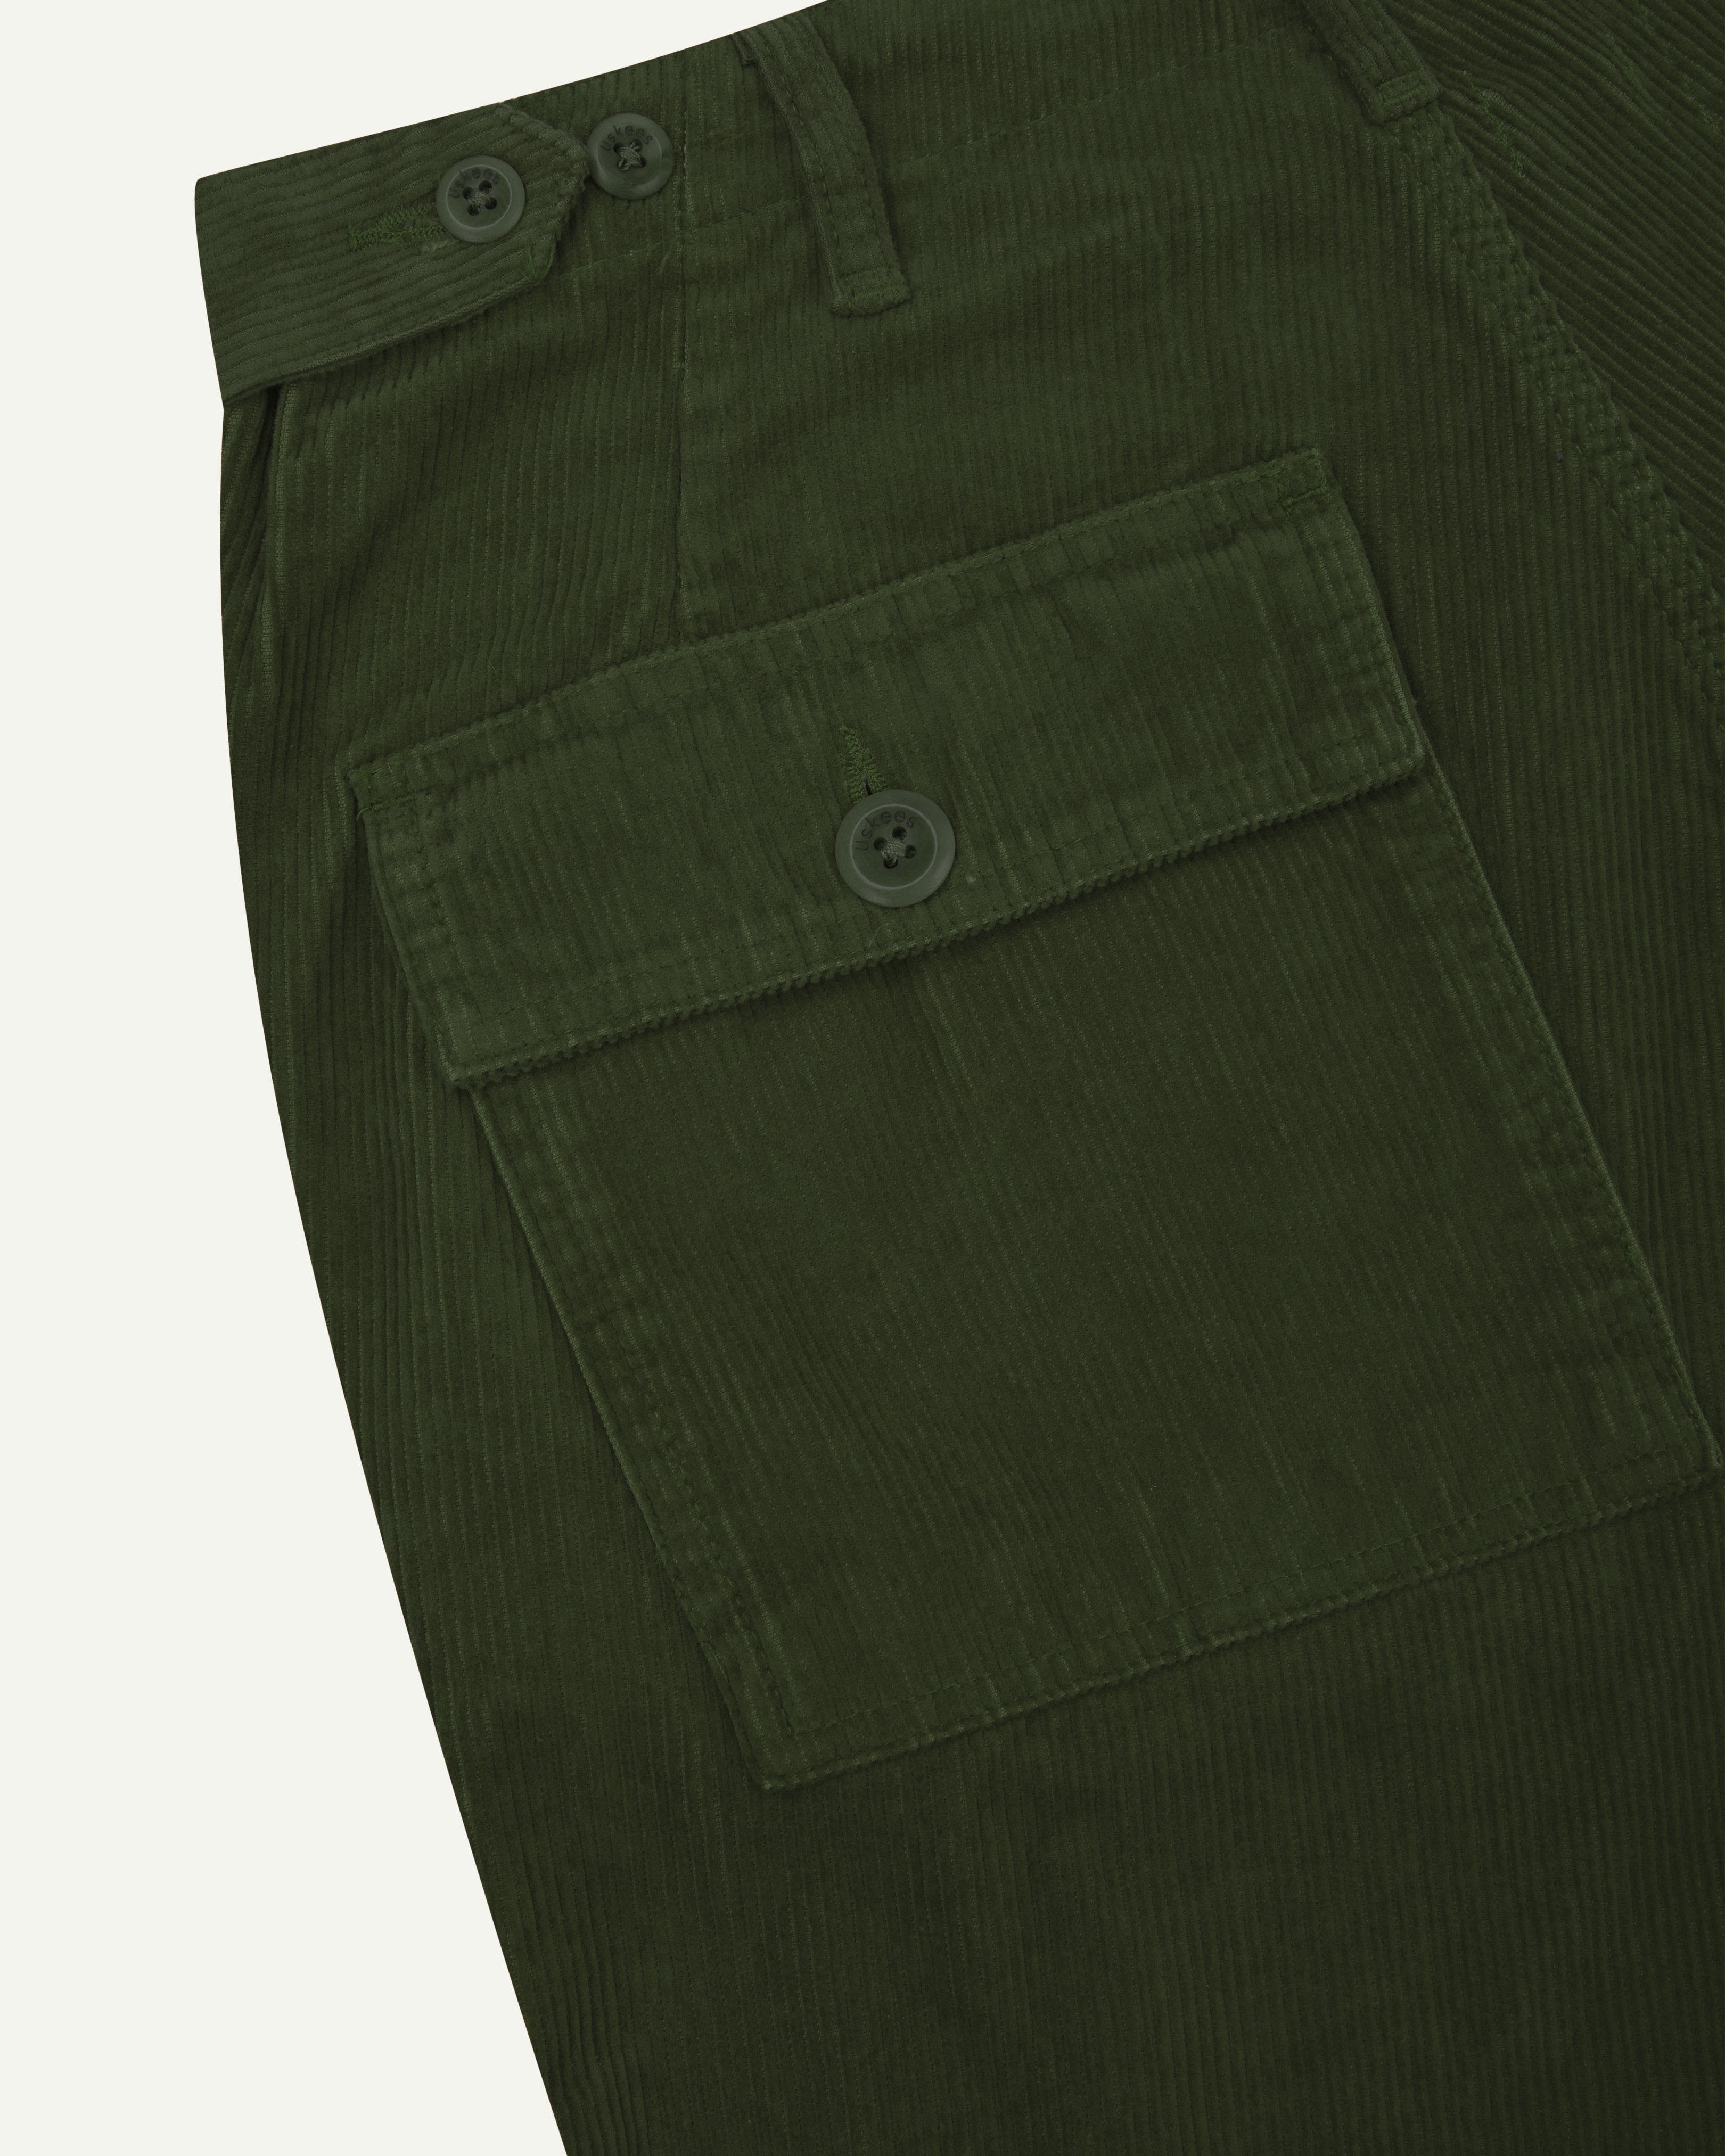 Close up shot of Uskees coriander green #5005 cord workwear pants showing pocket and waist detail.